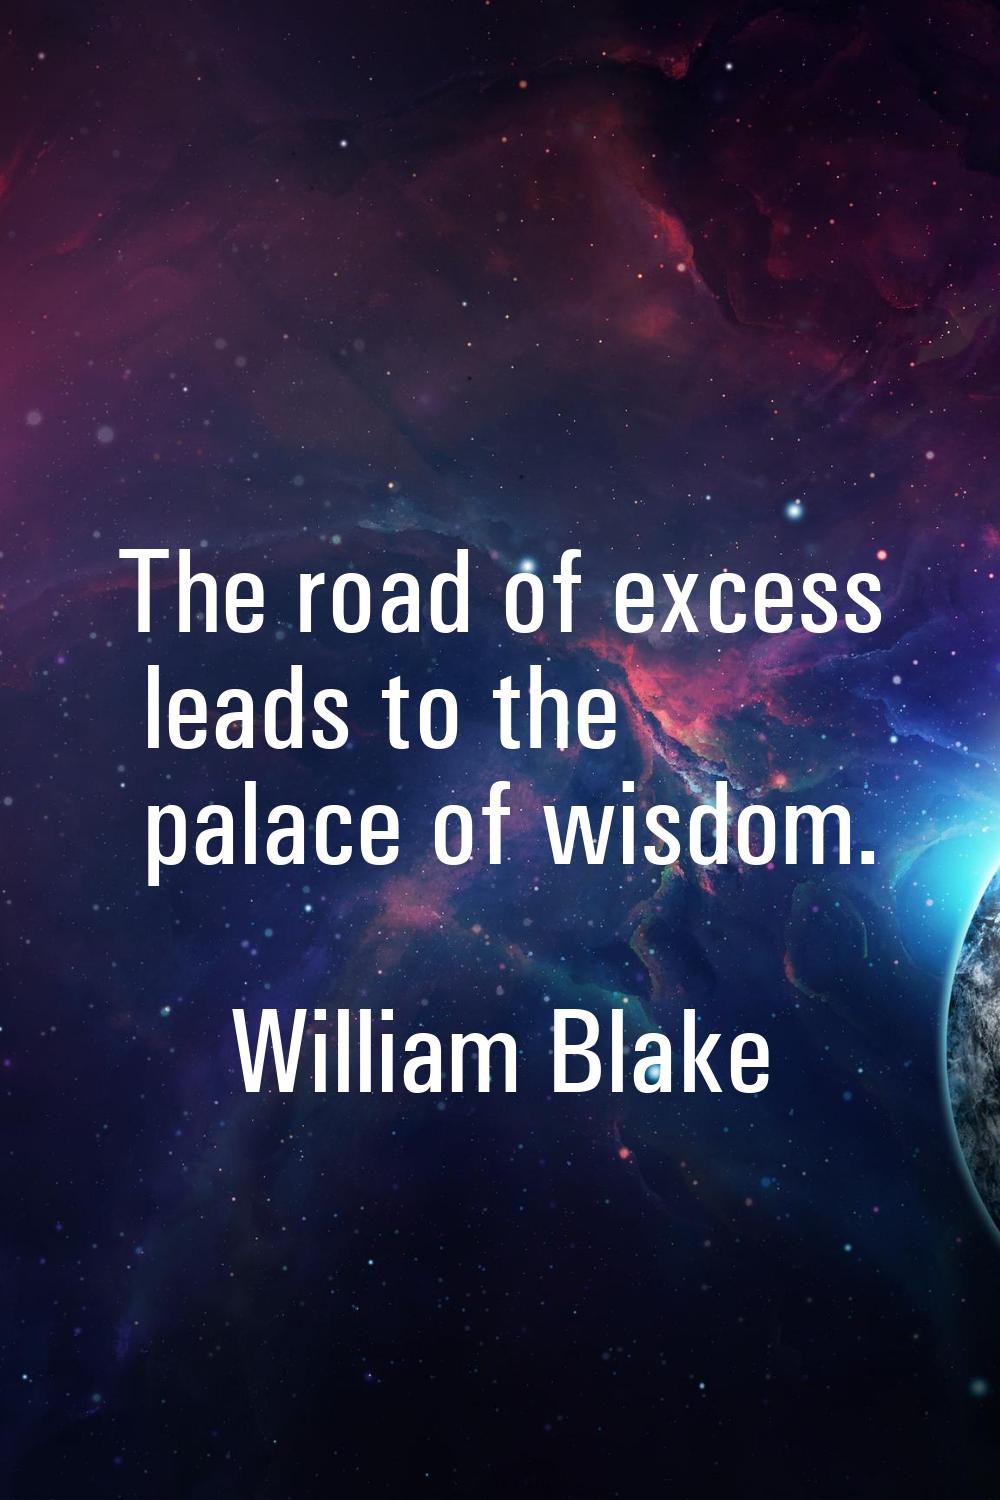 The road of excess leads to the palace of wisdom.